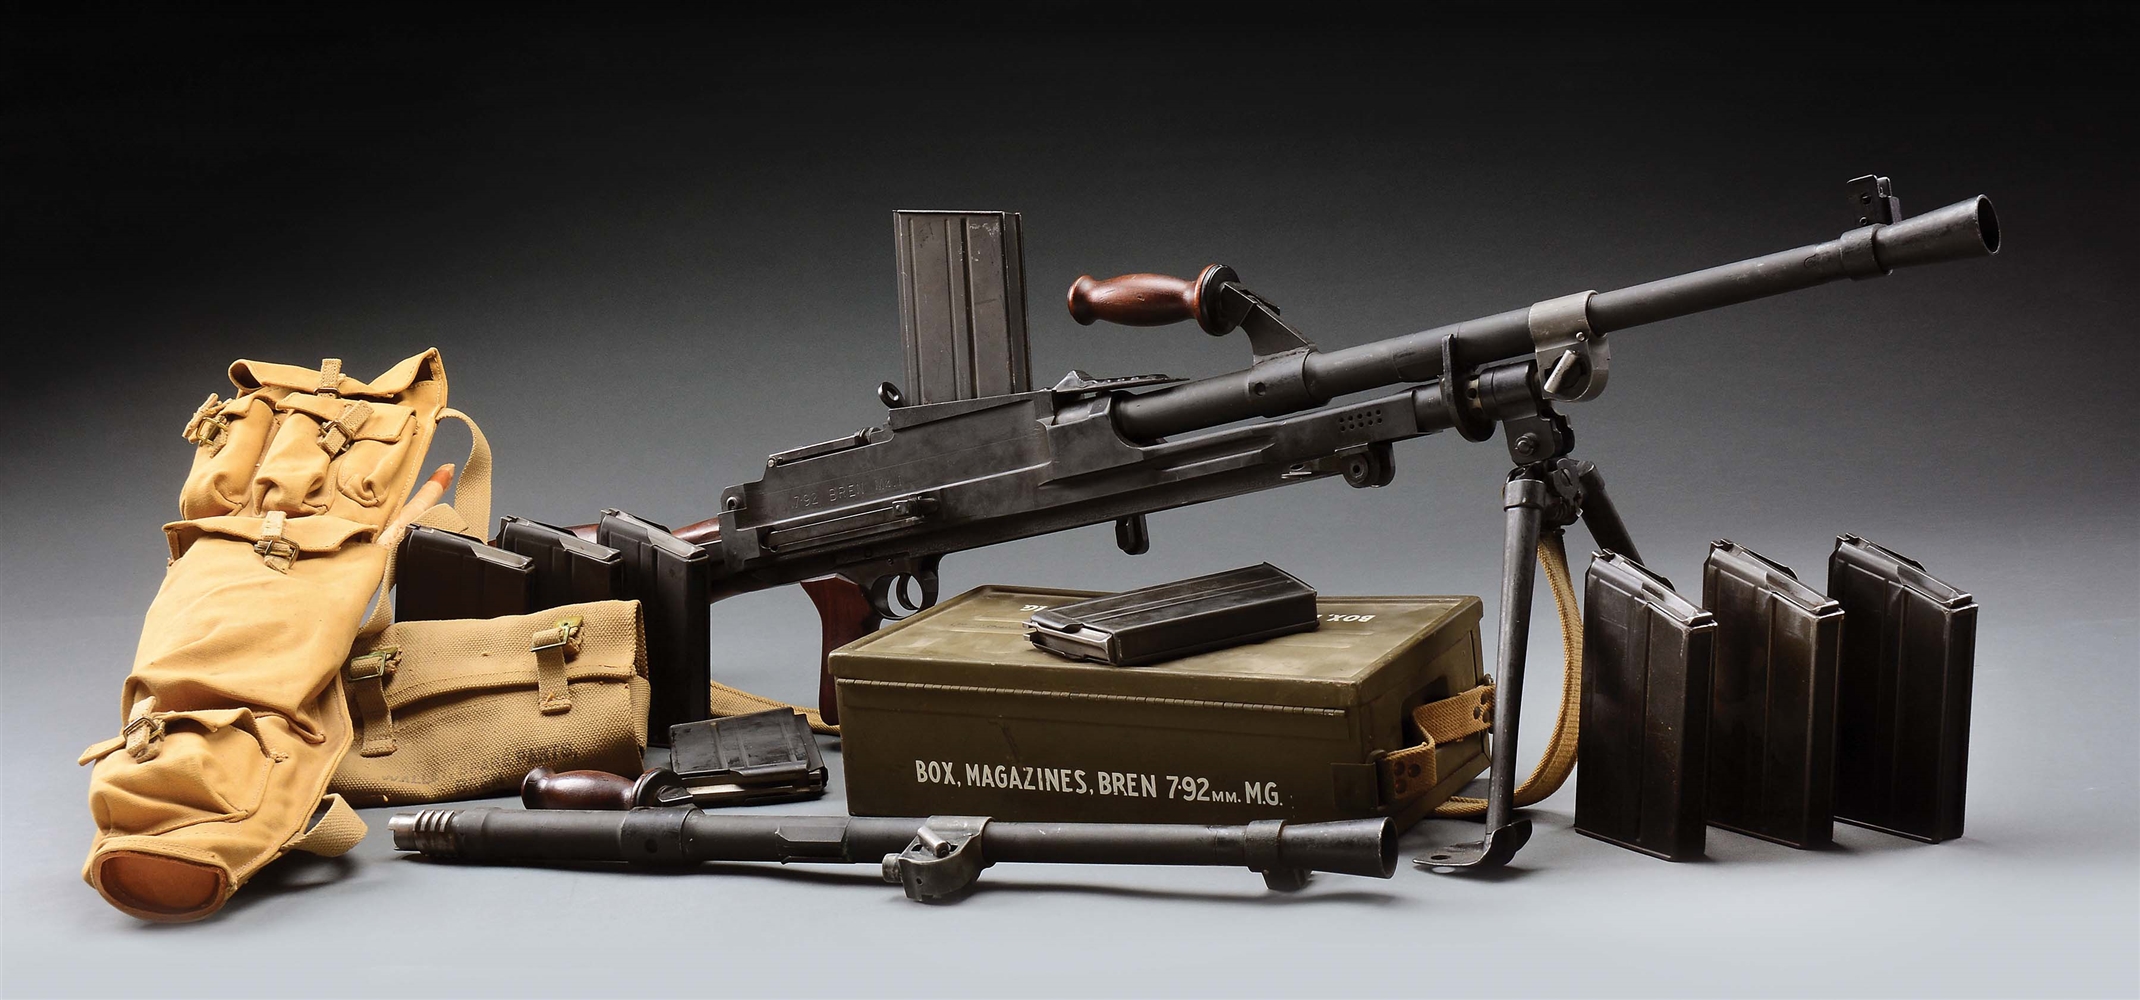 (N) SUPERB HIGH CONDITION EXTREMELY DESIRABLE ORIGINAL 8MM BREN MACHINE GUN WITH ACCESSORIES (CURIO AND RELIC).